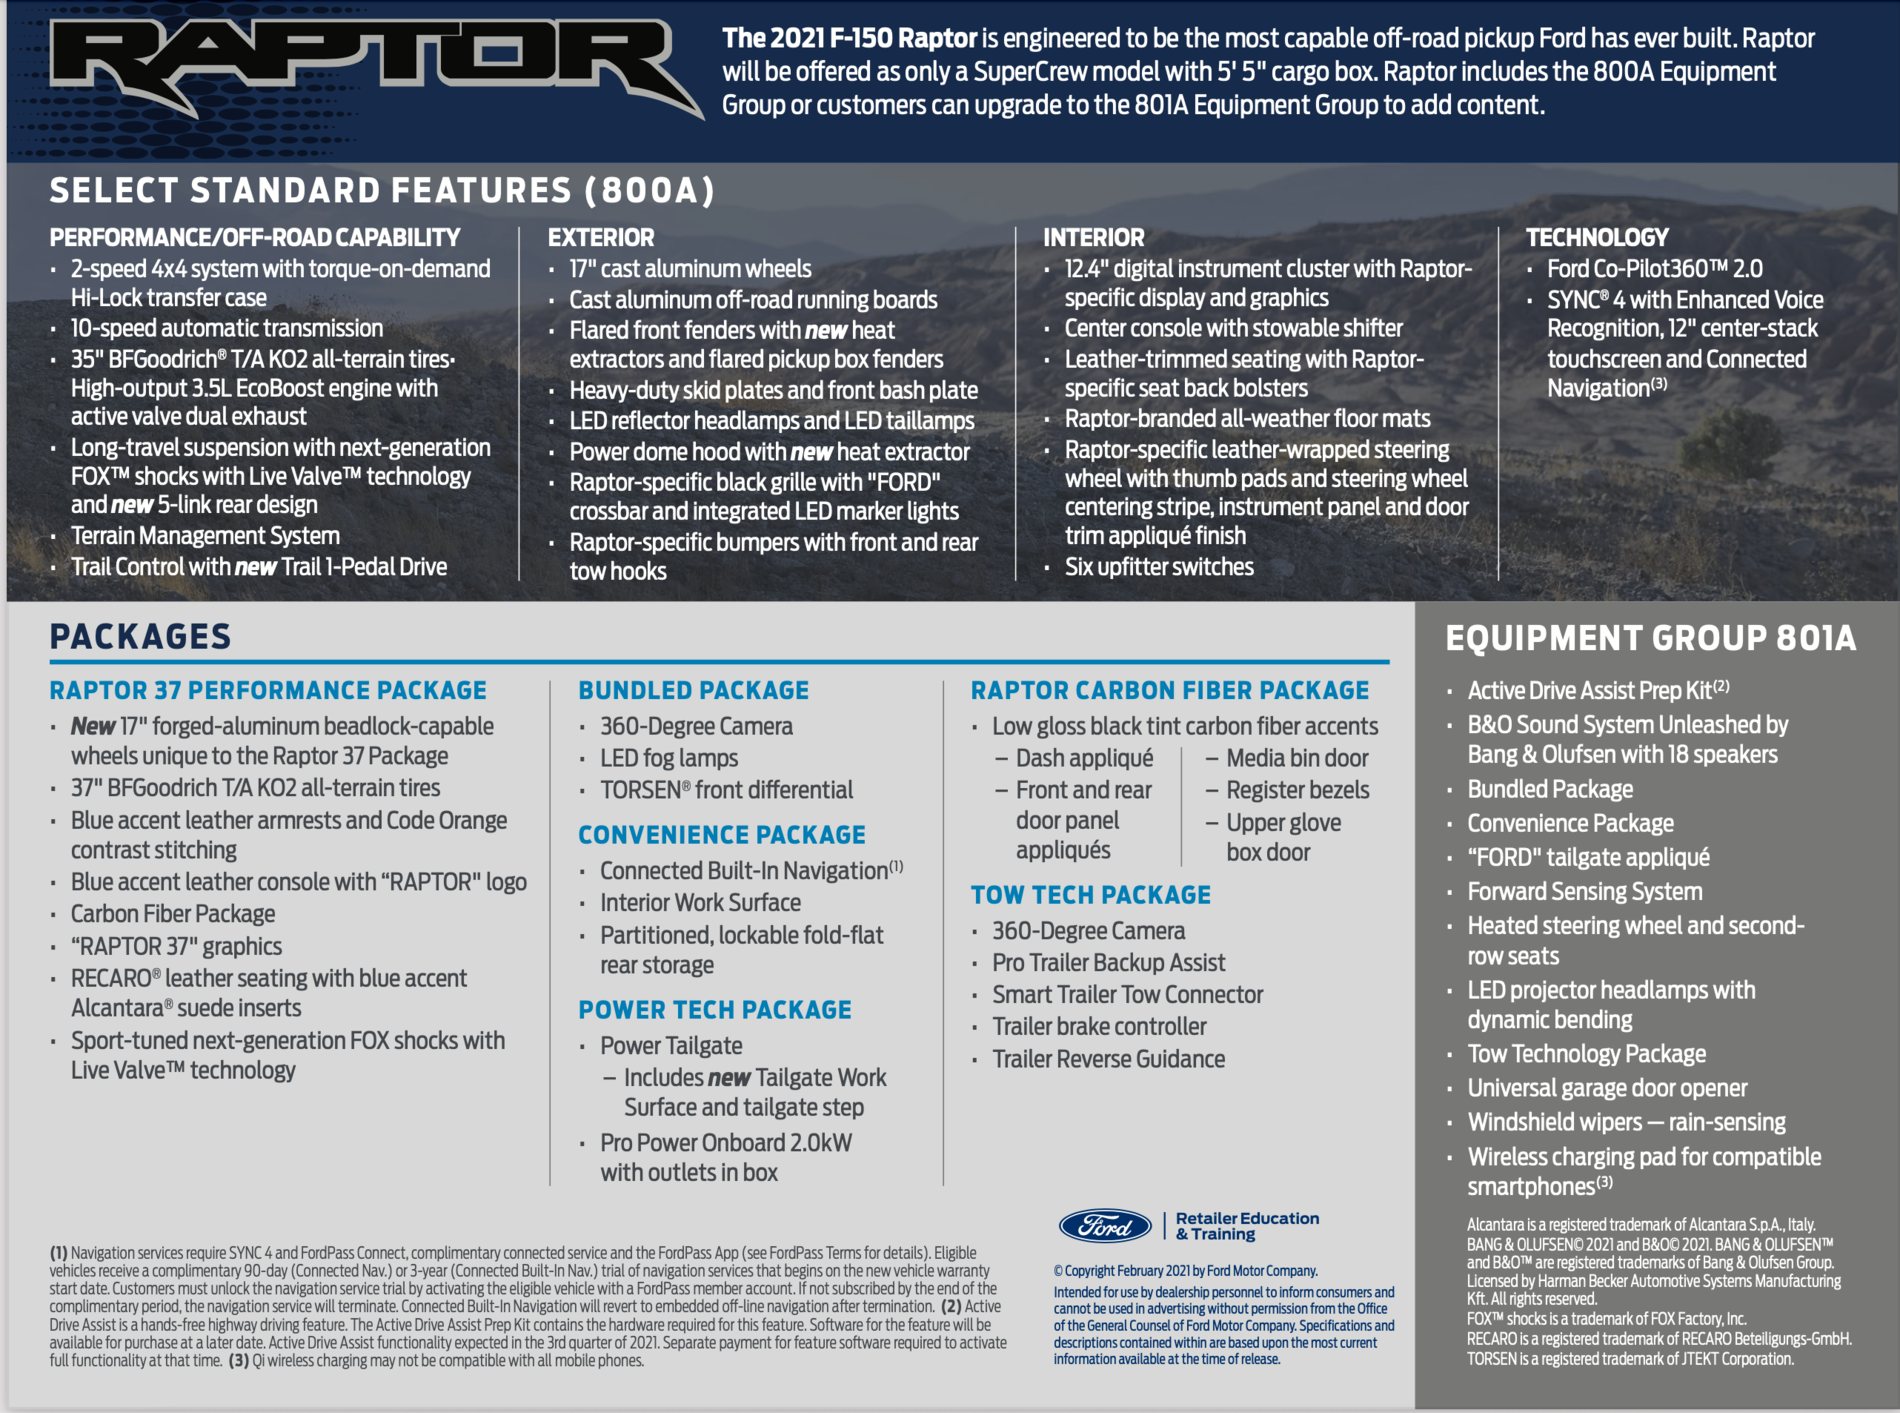 Ford F-150 2021 Raptor MSRP Price List! ? Screen Shot 2021-05-02 at 7.54.05 PM